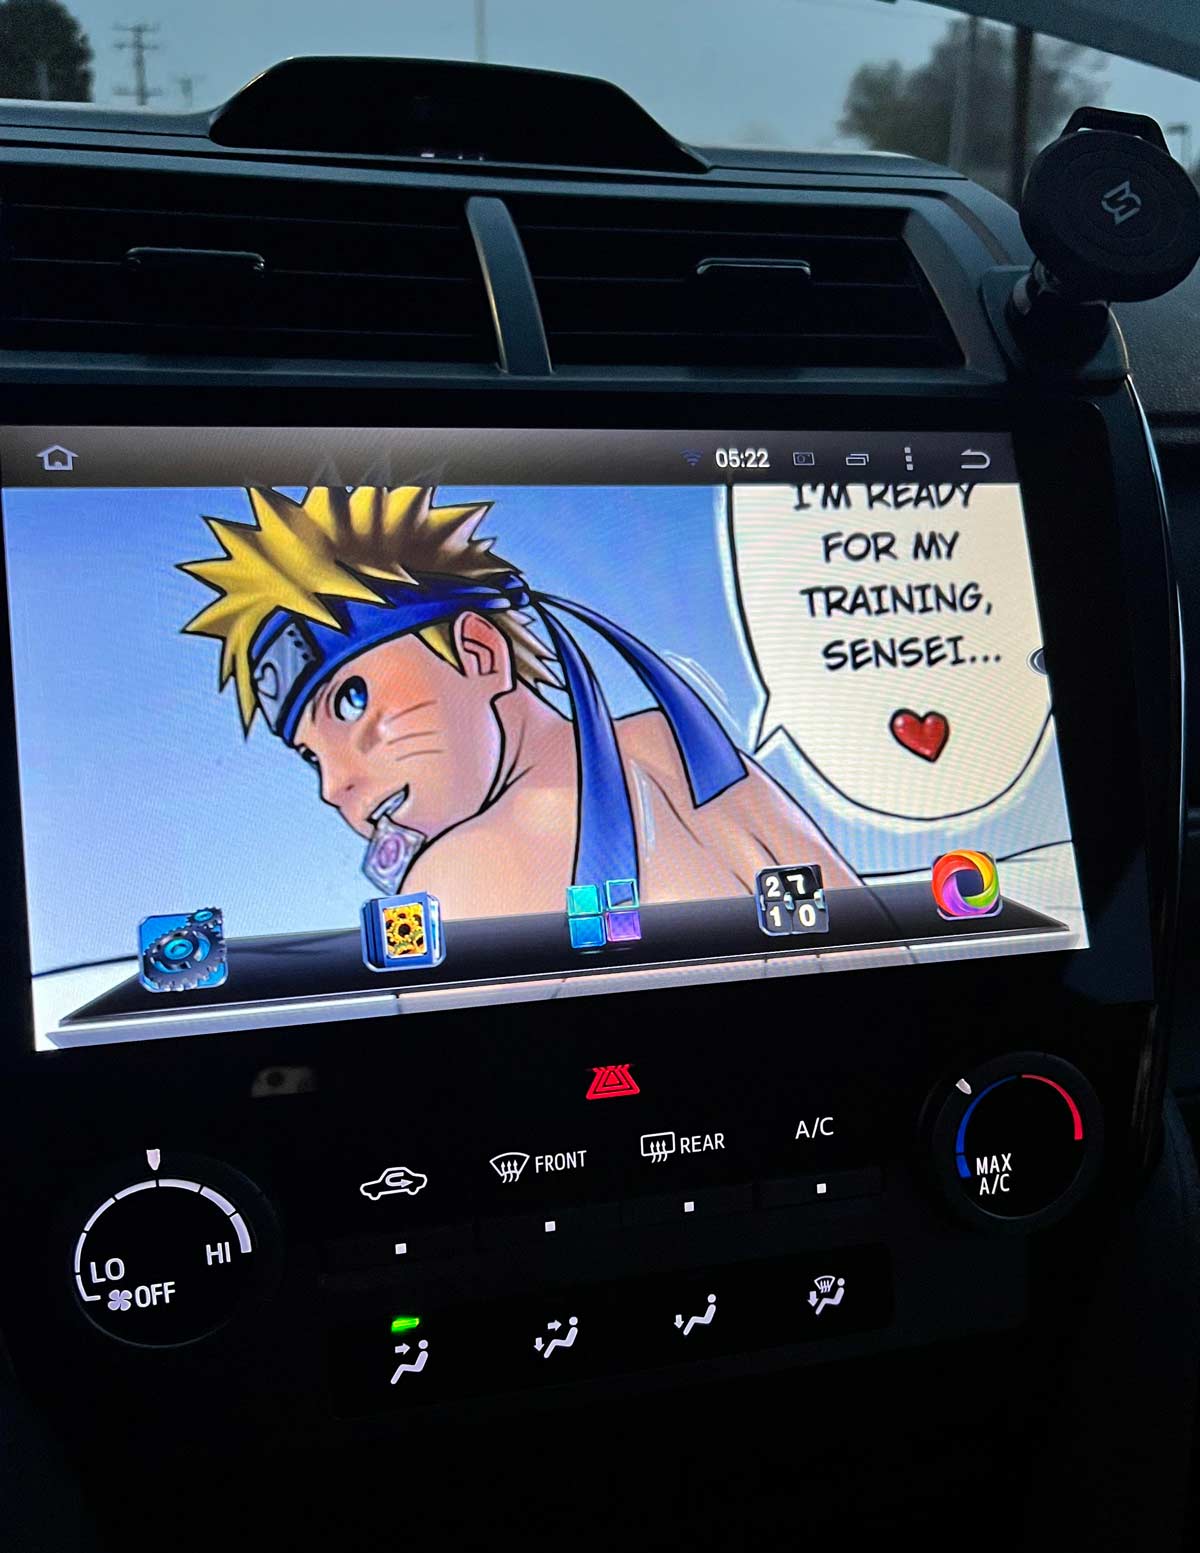 I was looking to buy a car. This was the wallpaper on one of the car’s screen